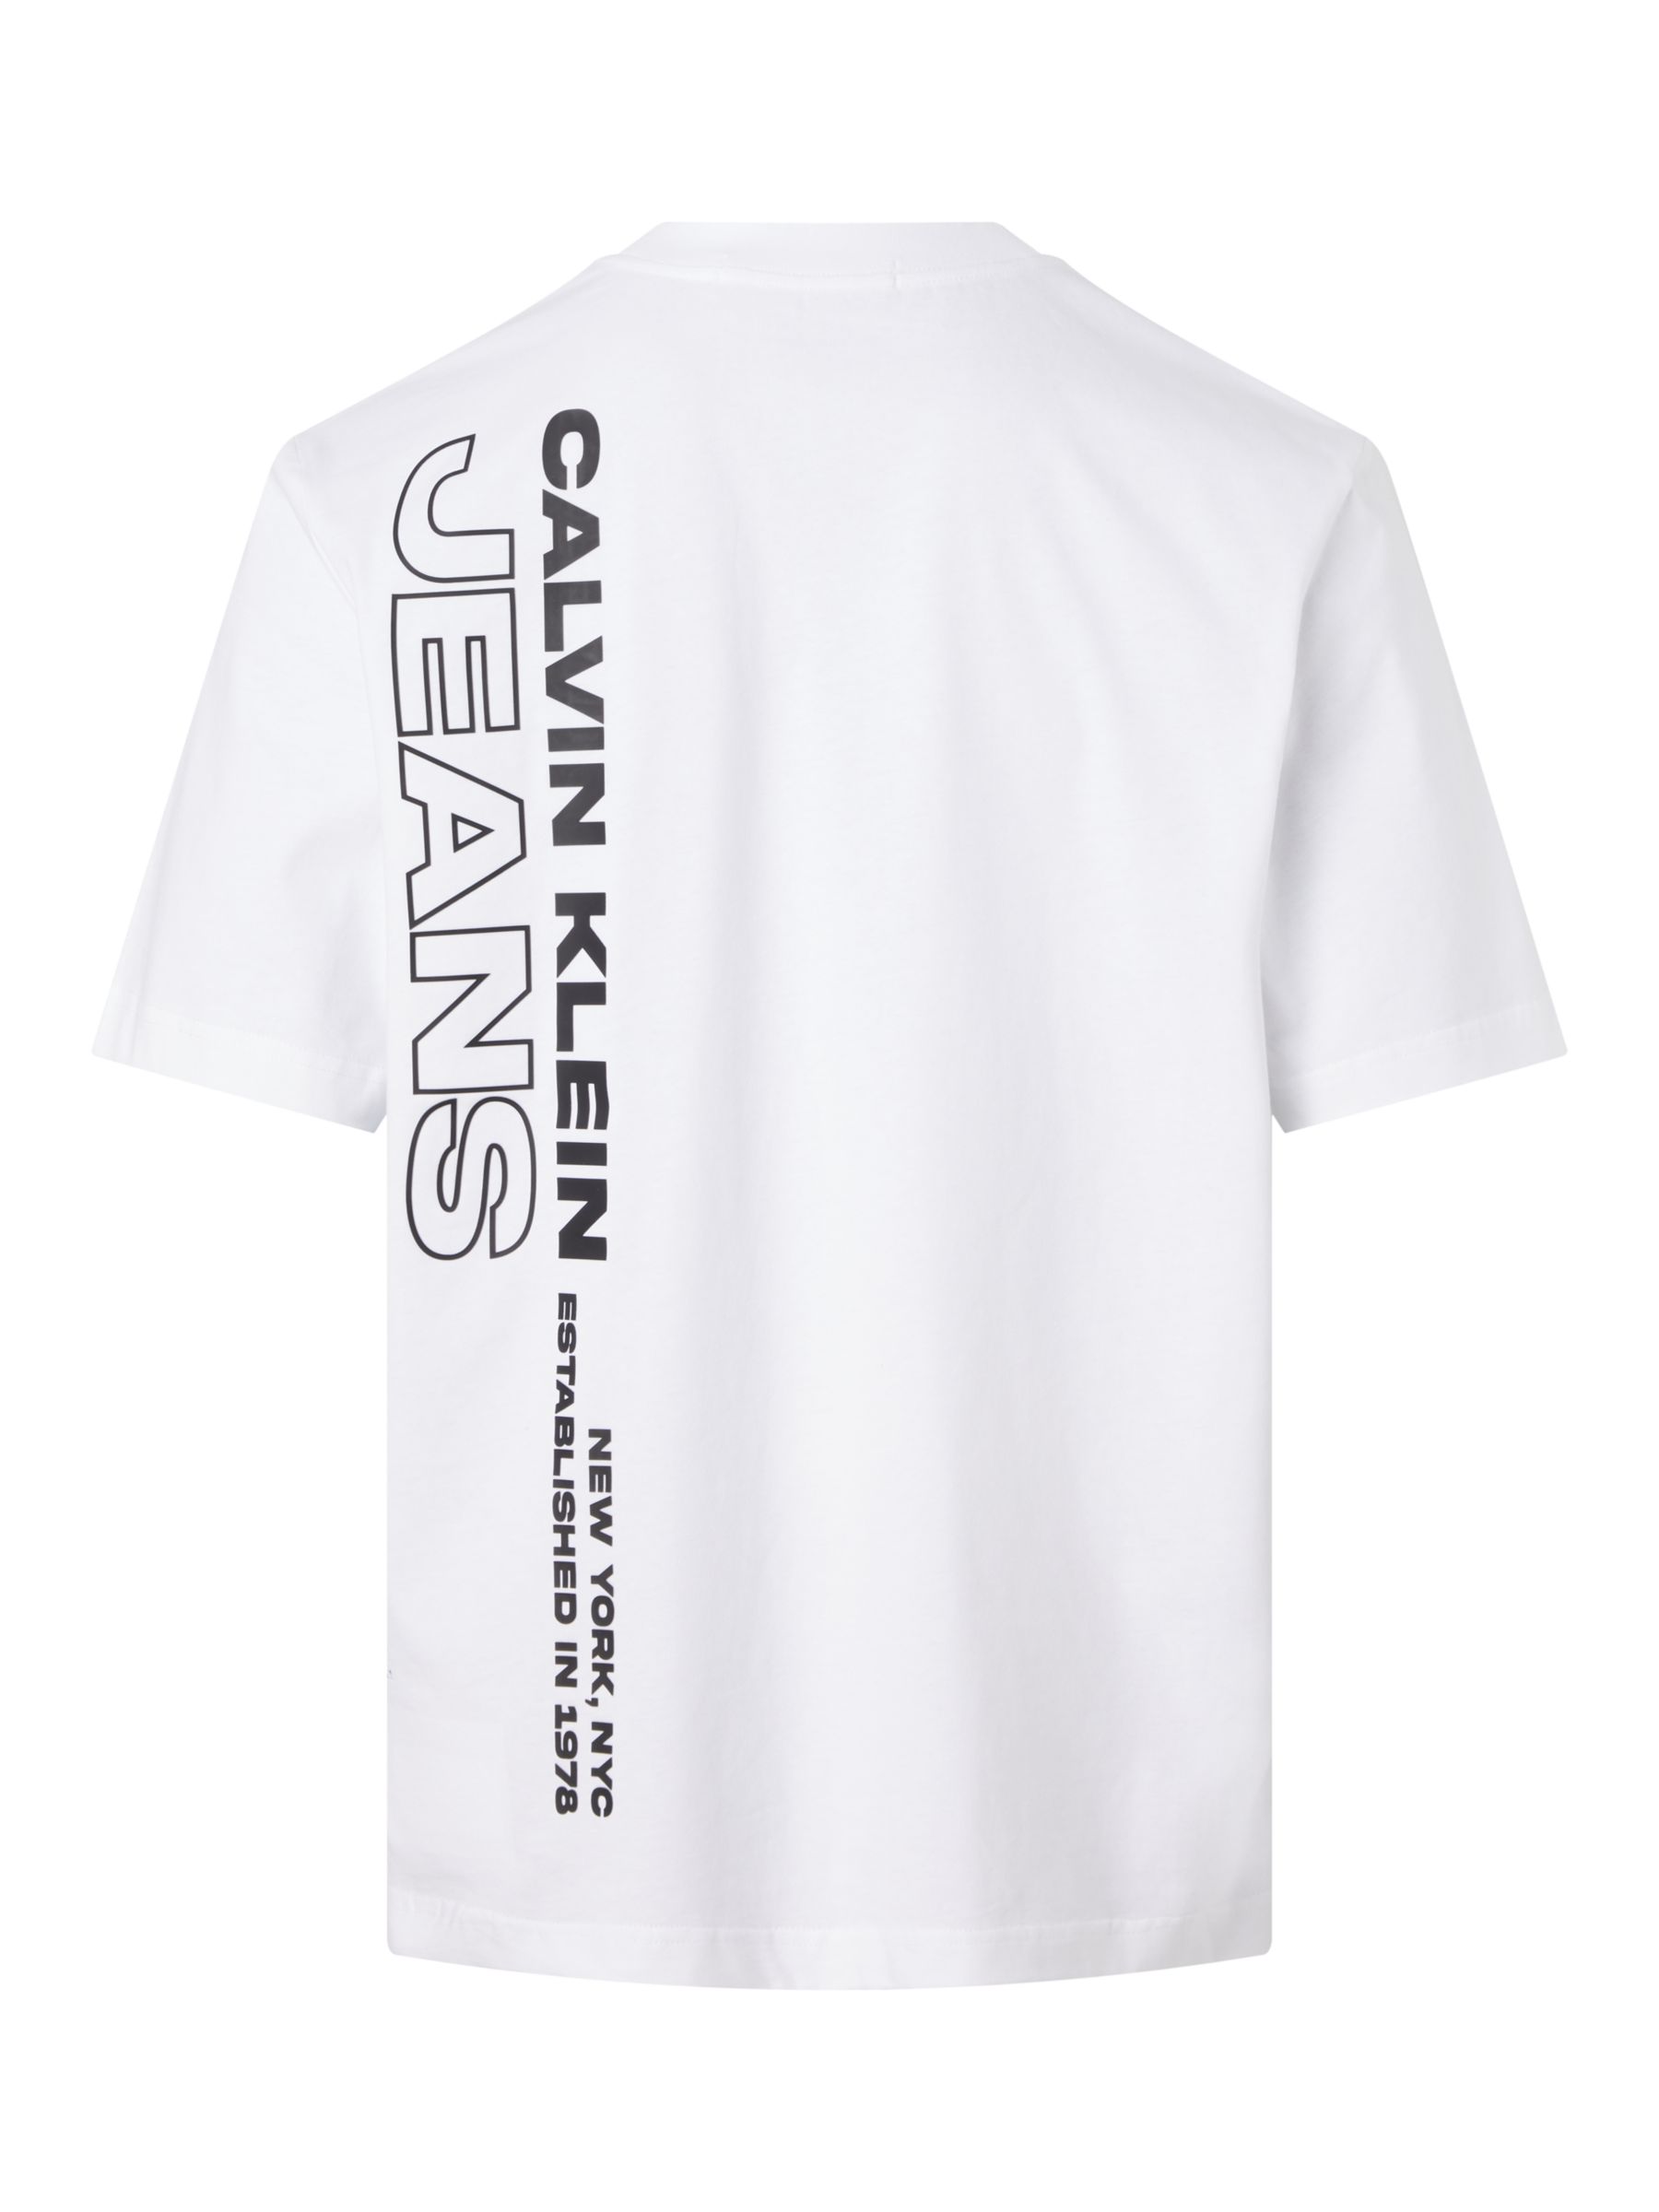 Buy Calvin Klein Jeans NYC Print T-Shirt, Bright White Online at johnlewis.com